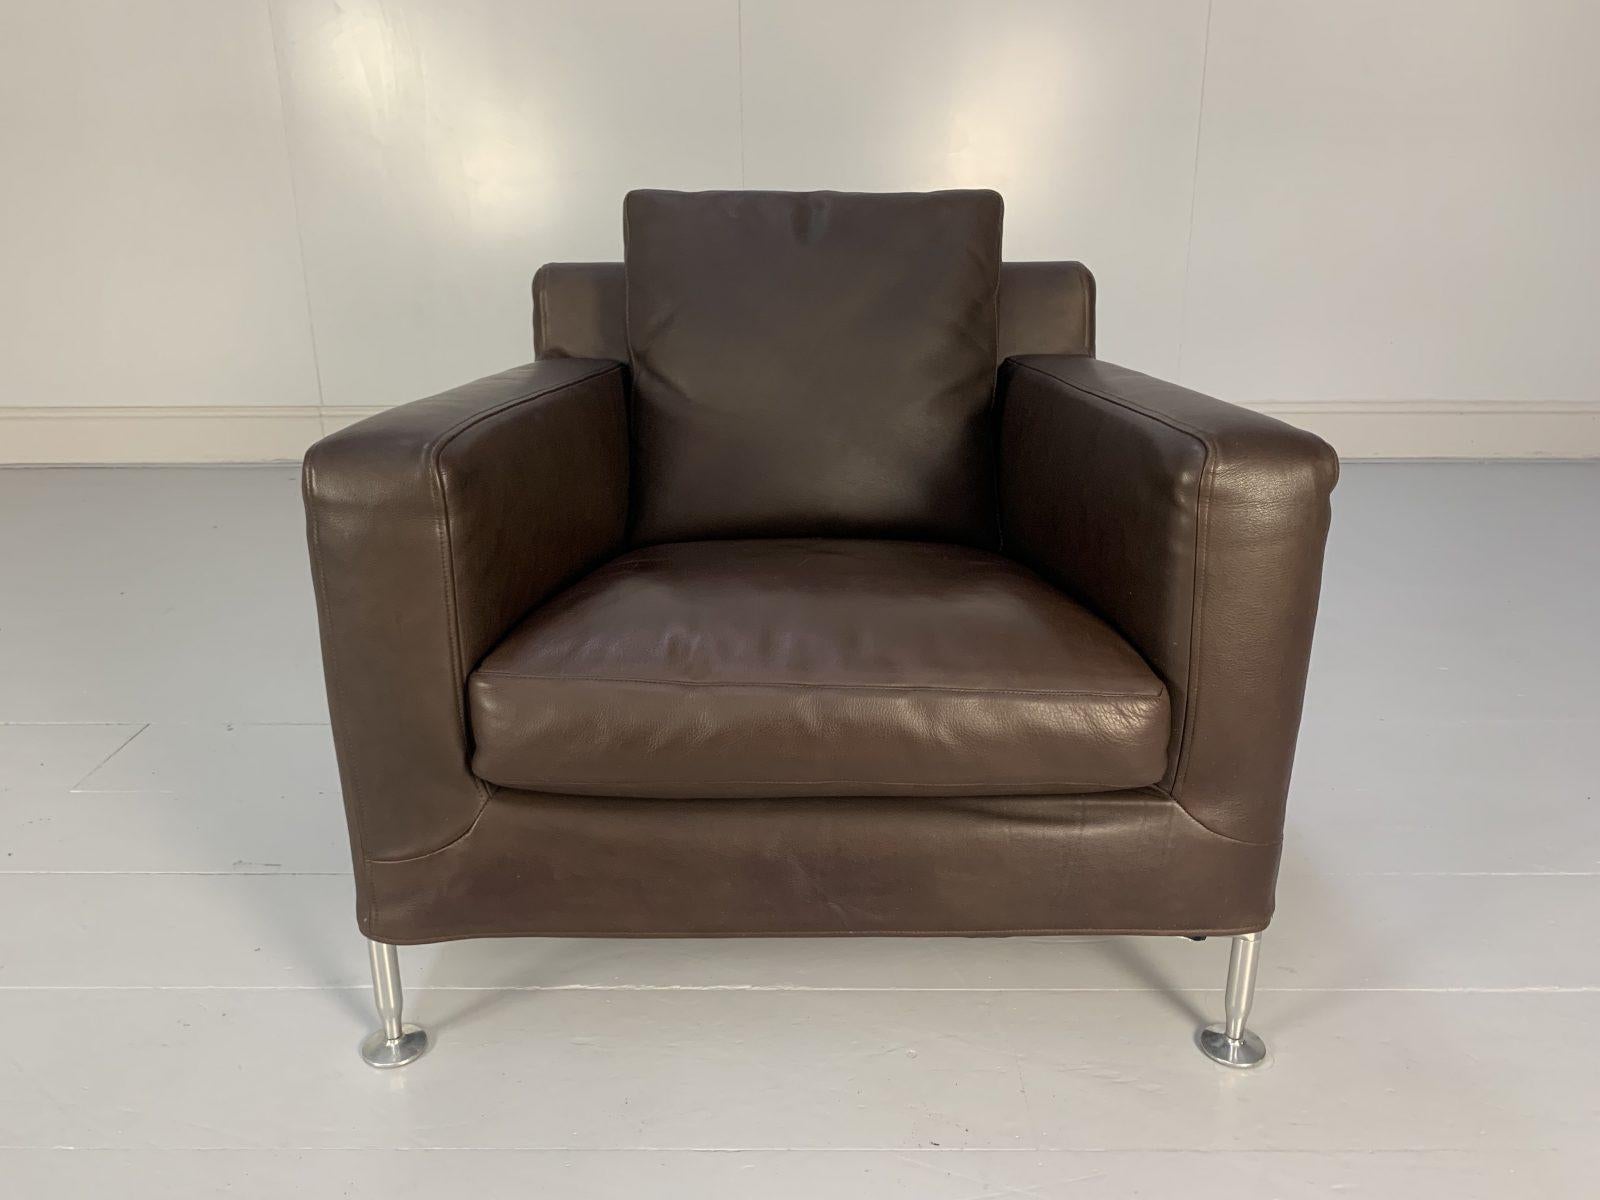 Pair of B&B Italia “Harry H85” Armchairs in Brown “Gamma” Leather For Sale 2